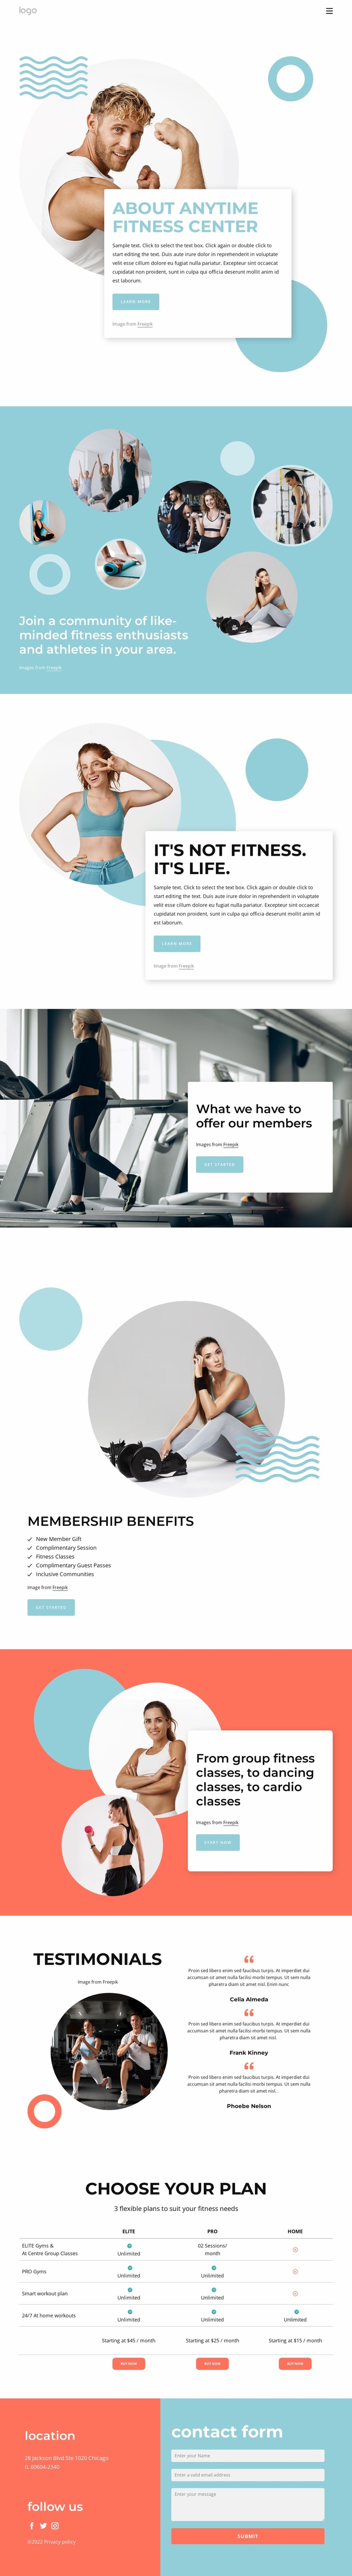 About Anytime fitness center Website Builder Templates